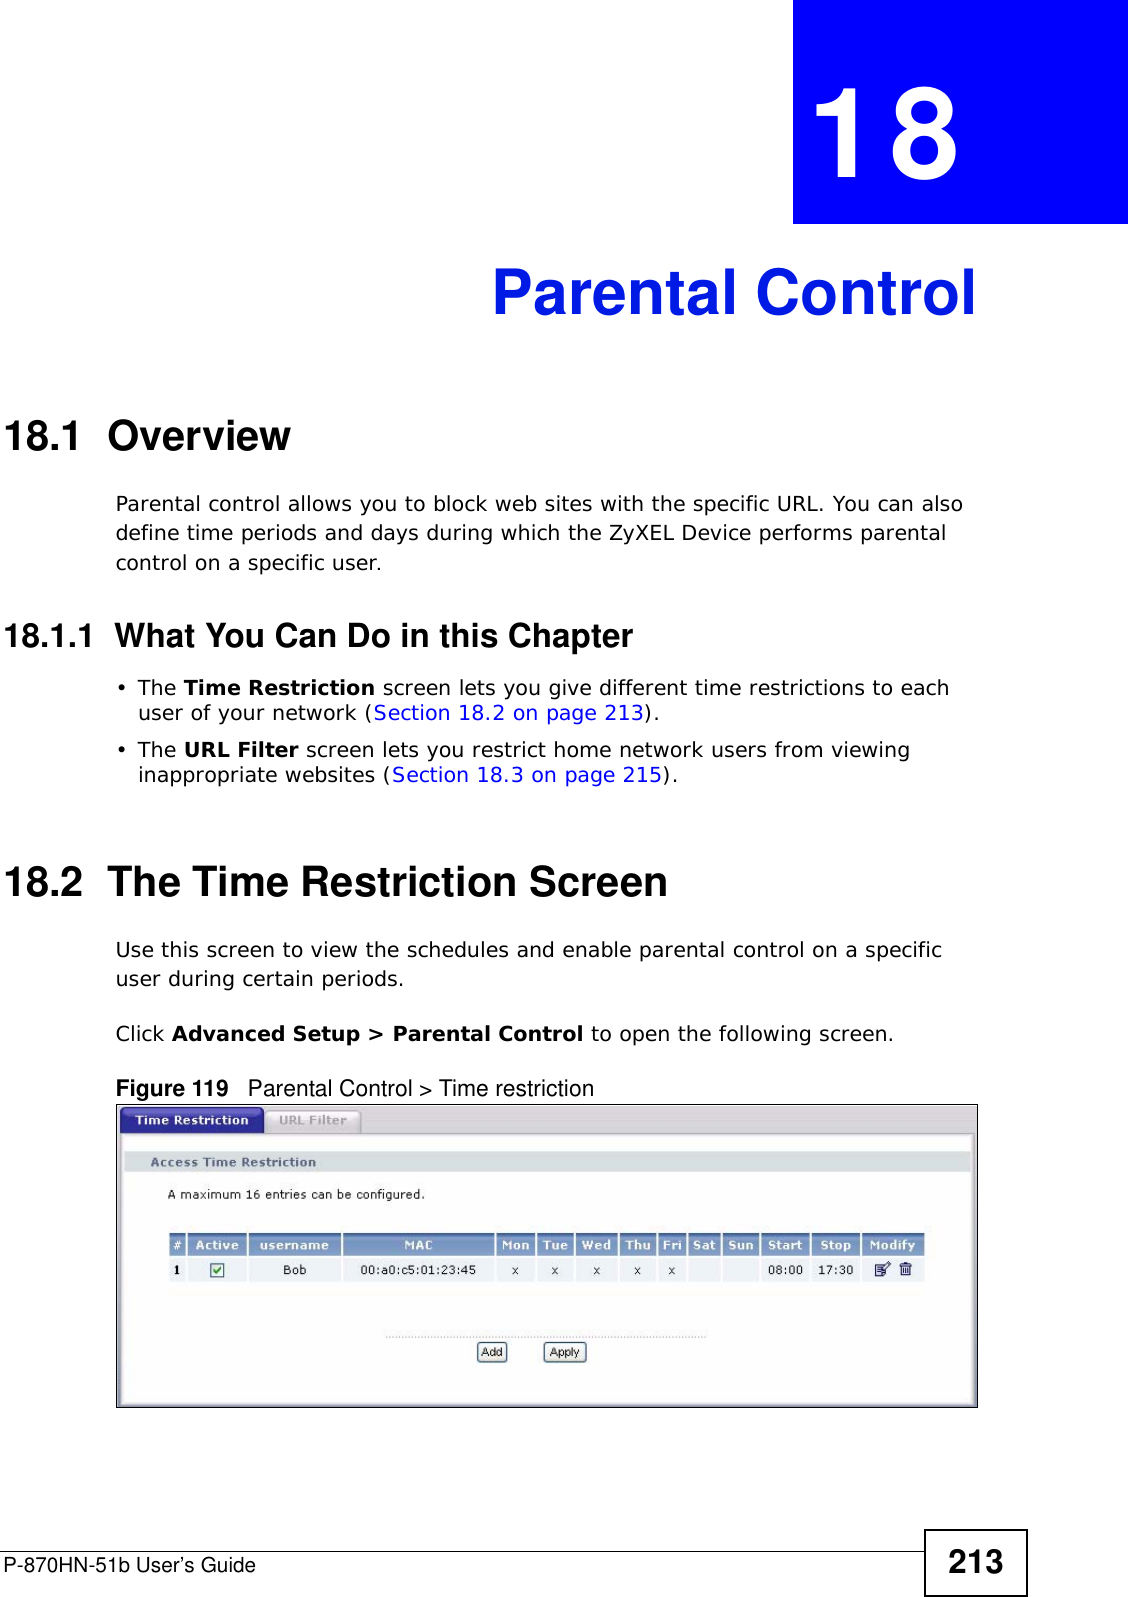 P-870HN-51b User’s Guide 213CHAPTER  18 Parental Control18.1  OverviewParental control allows you to block web sites with the specific URL. You can also define time periods and days during which the ZyXEL Device performs parental control on a specific user. 18.1.1  What You Can Do in this Chapter•The Time Restriction screen lets you give different time restrictions to each user of your network (Section 18.2 on page 213).•The URL Filter screen lets you restrict home network users from viewing inappropriate websites (Section 18.3 on page 215).18.2  The Time Restriction ScreenUse this screen to view the schedules and enable parental control on a specific user during certain periods.Click Advanced Setup &gt; Parental Control to open the following screen. Figure 119   Parental Control &gt; Time restriction 